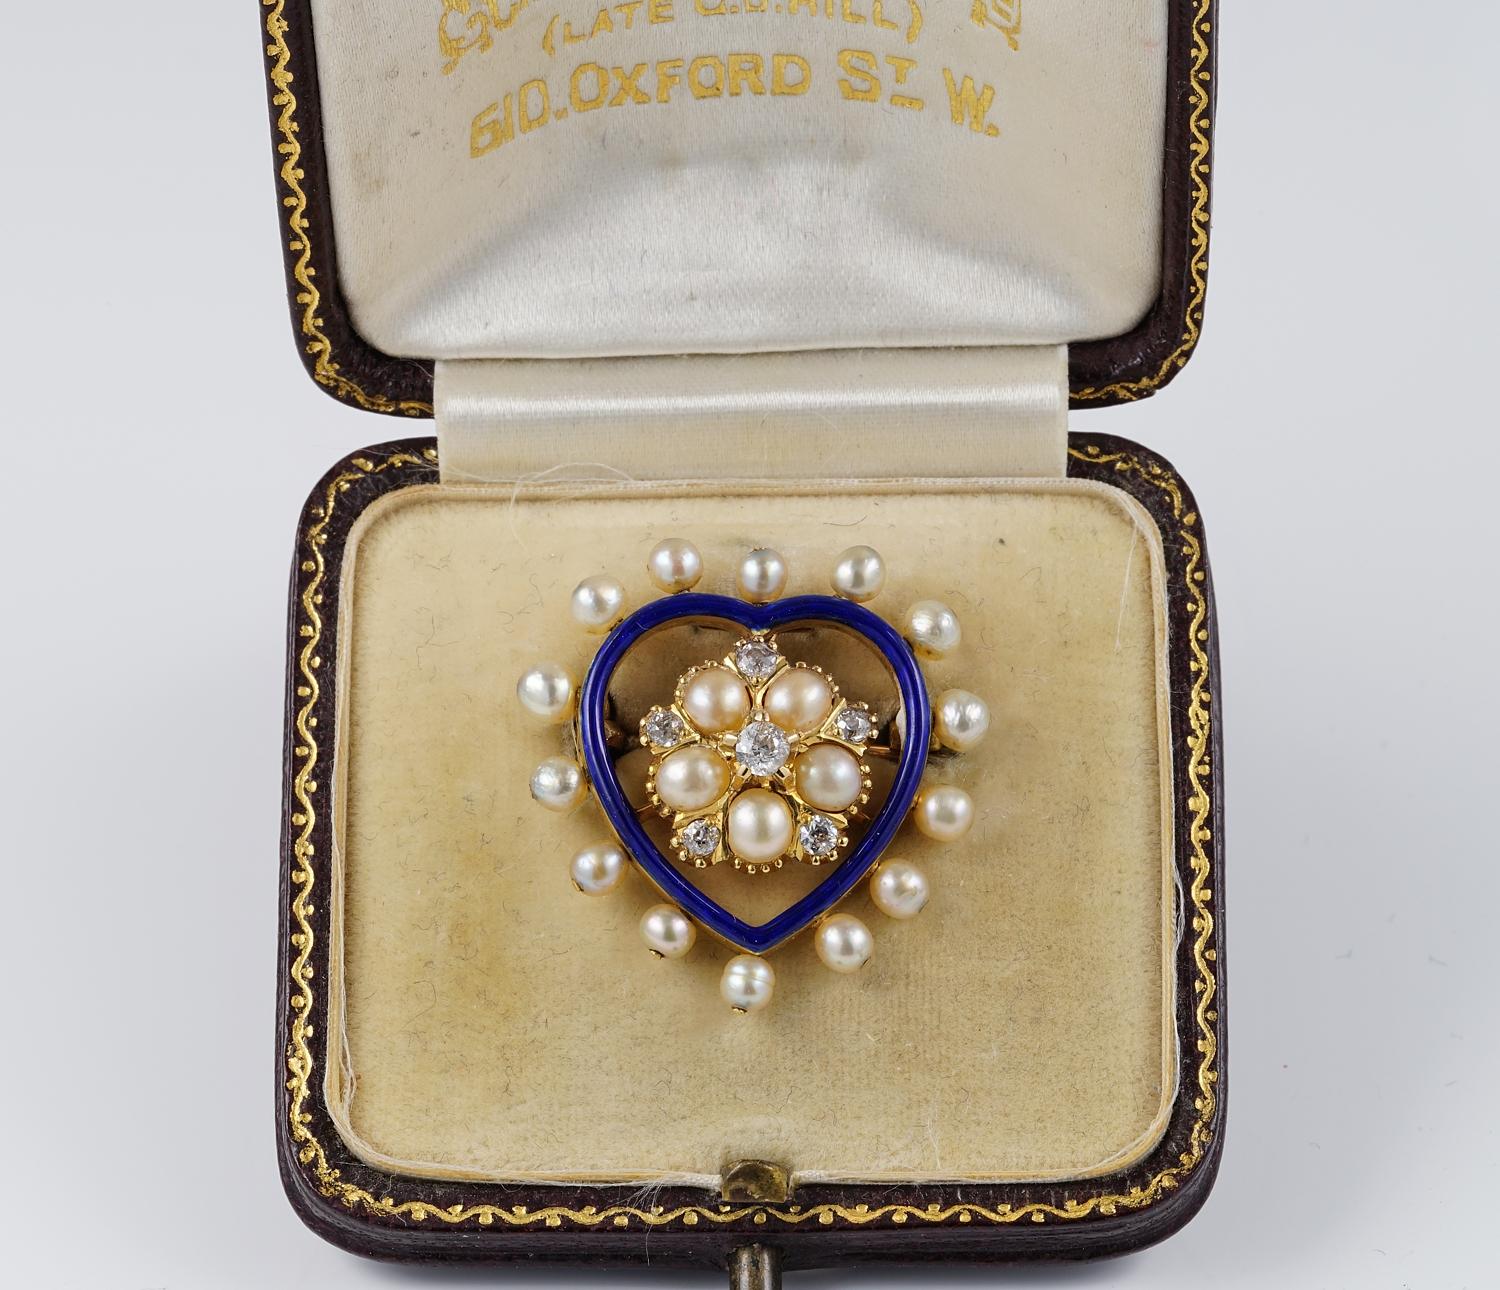 This sweet and rare heart pendant/ brooch is Victorian period, 1880 ca
expressing the romanticism tradition of the Victorian era, crafted of solid 18 KT gold
Set throughout with a combination  of Diamonds, natural Pearls  and gorgeous Royal Blue